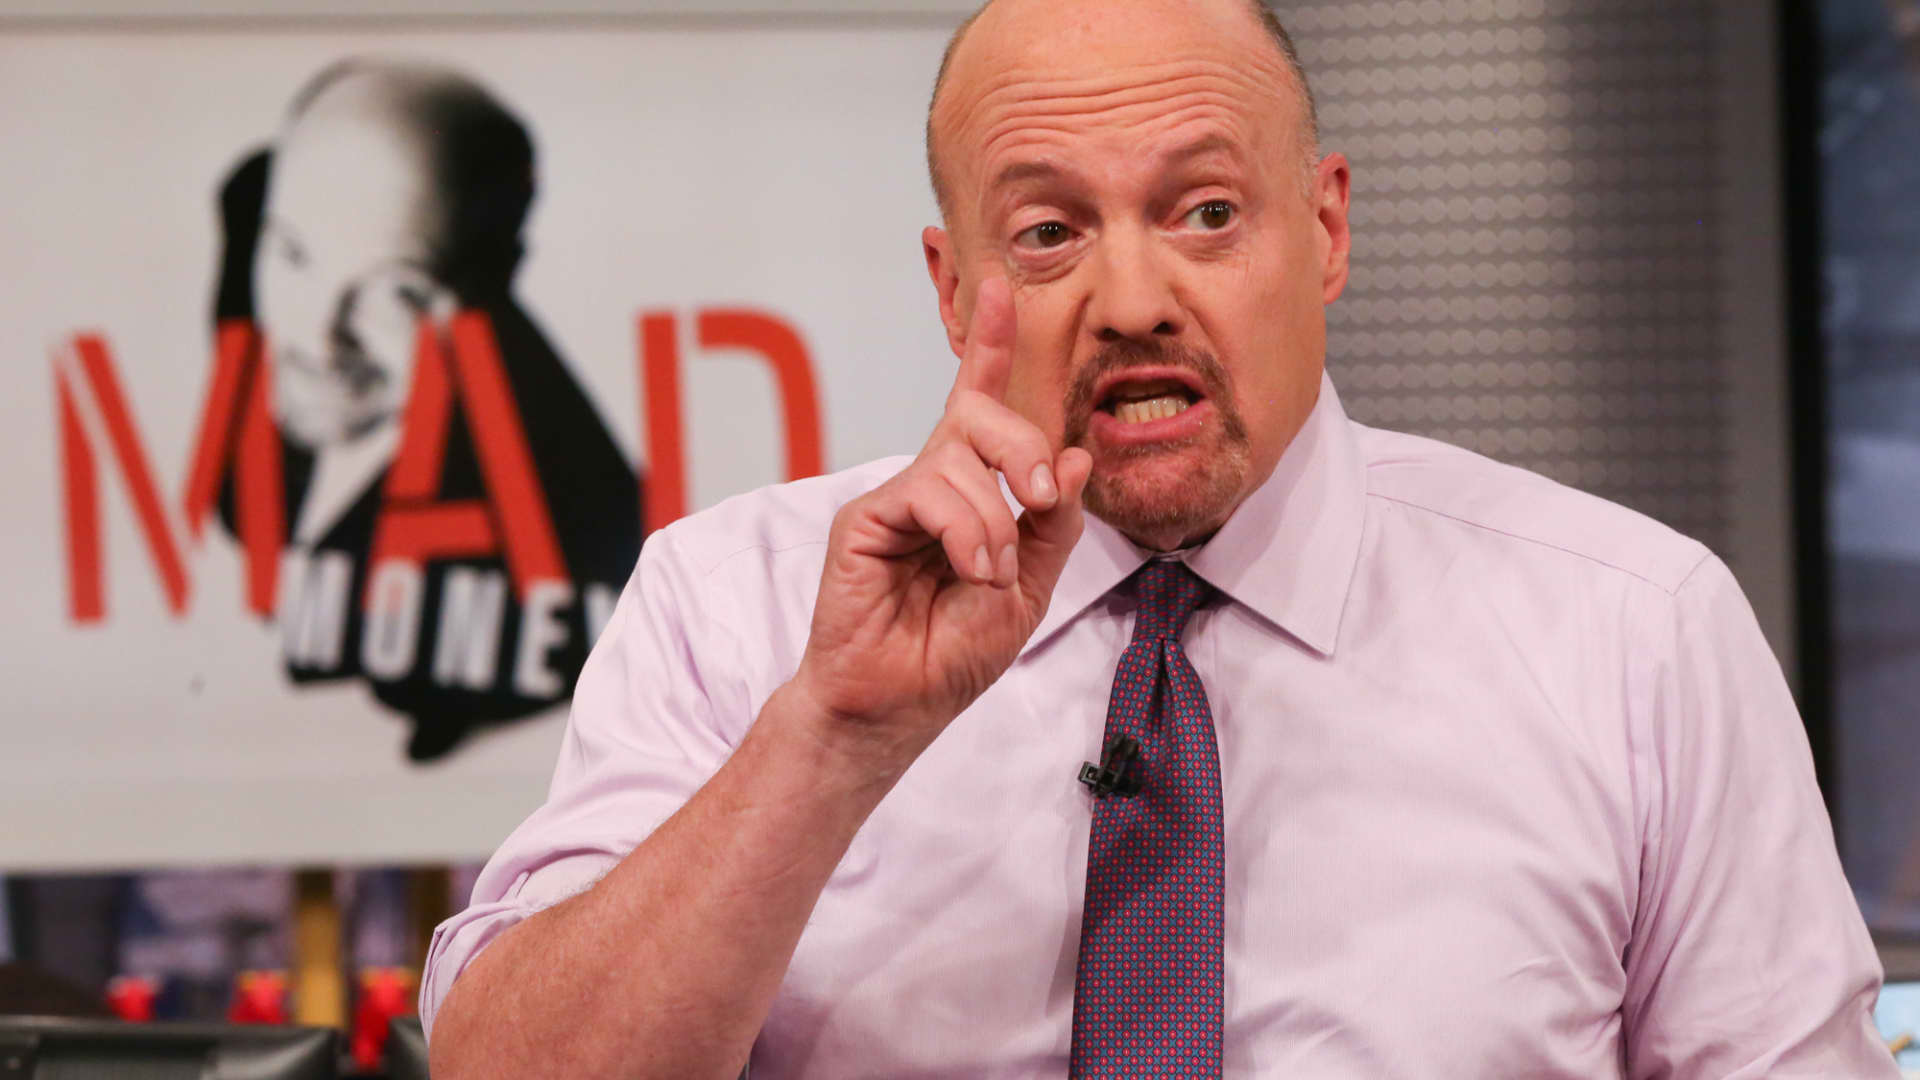 Jim Cramer says investors should buy these 11 recently-boosted dividend stocks